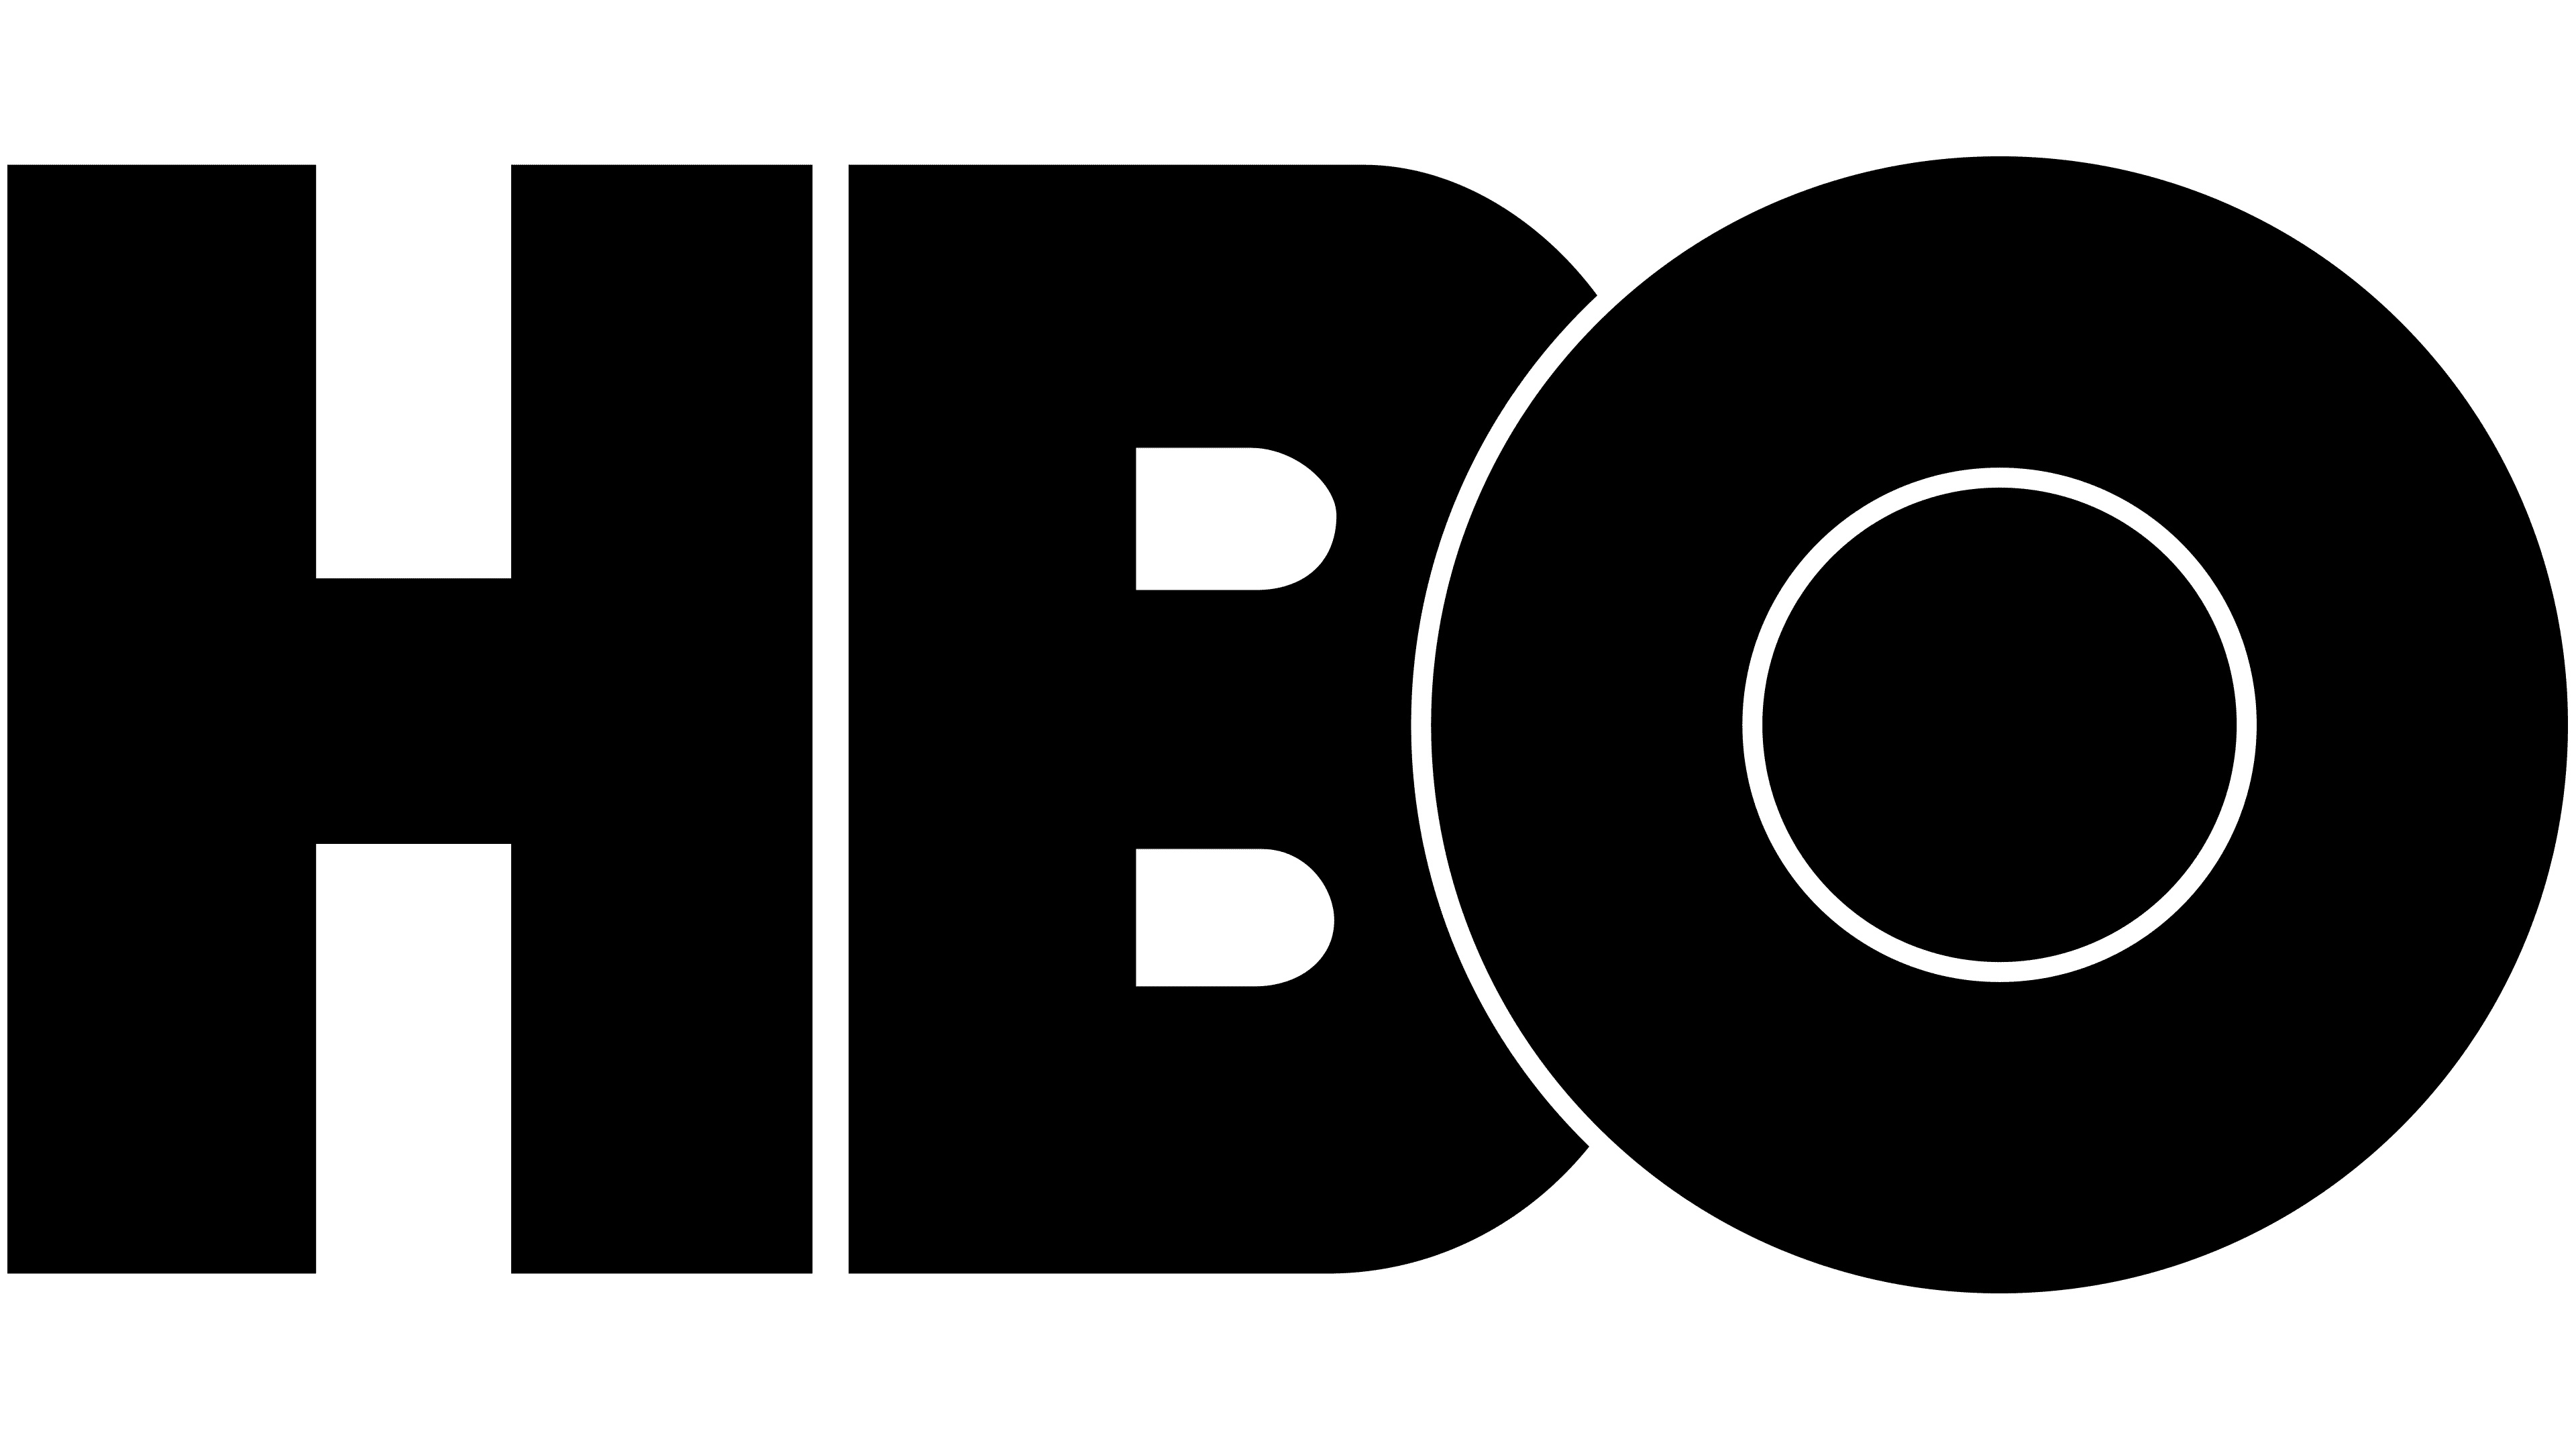 HBO: An American pay television network, Logo used in 1975-1980. 3840x2160 4K Background.